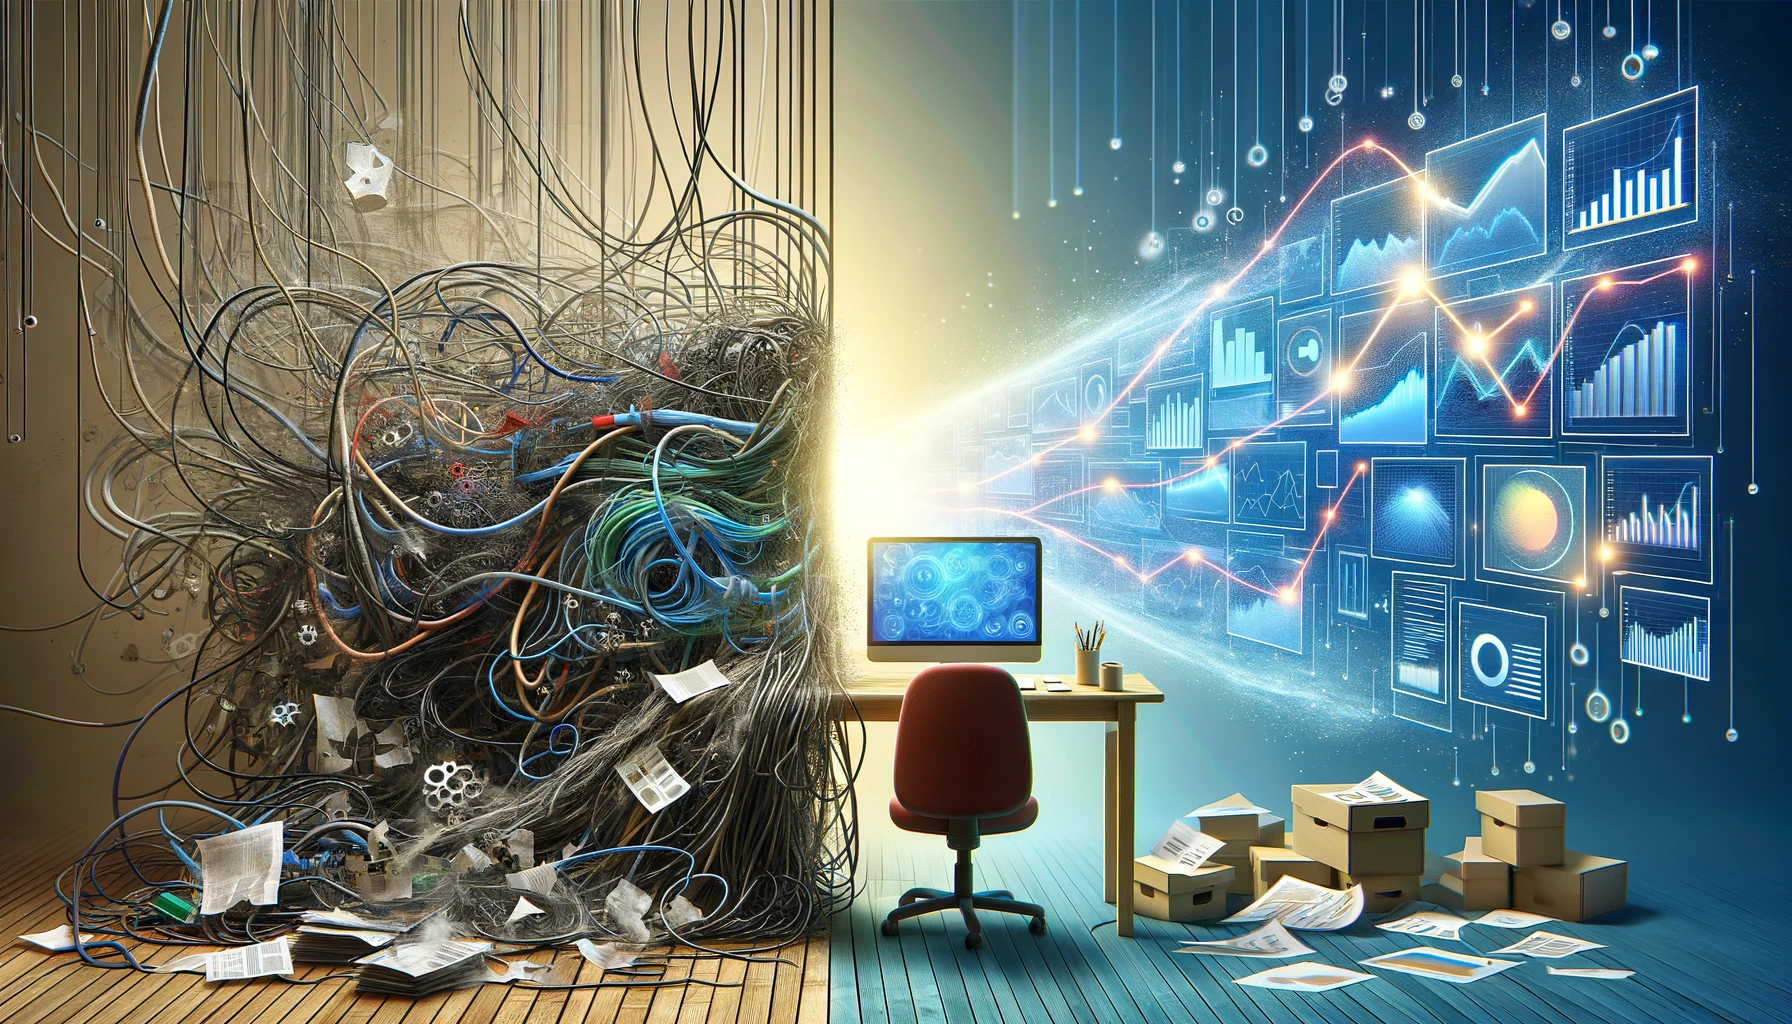 This image should creatively represent the journey from overwhelming complexity to streamlined simplicity within the context of business intelligence (BI) reporting. Envision the left side featuring a tangled, chaotic mess of wires, graphs, and screens, symbolizing the confusion and frustration often felt by non-technical users attempting to create their own BI reports and dashboards from scratch. This chaos gradually transforms into a clean, organized workspace on the right, with a sleek computer displaying a beautifully simple, intuitive dashboard. The transformation should be depicted as a seamless flow, suggesting the ease with which users can transition to a more user-friendly approach to BI, where pre-made dashboards simplify the process of data analysis. The atmosphere should be hopeful and enlightened, emphasizing the liberation from complexity.